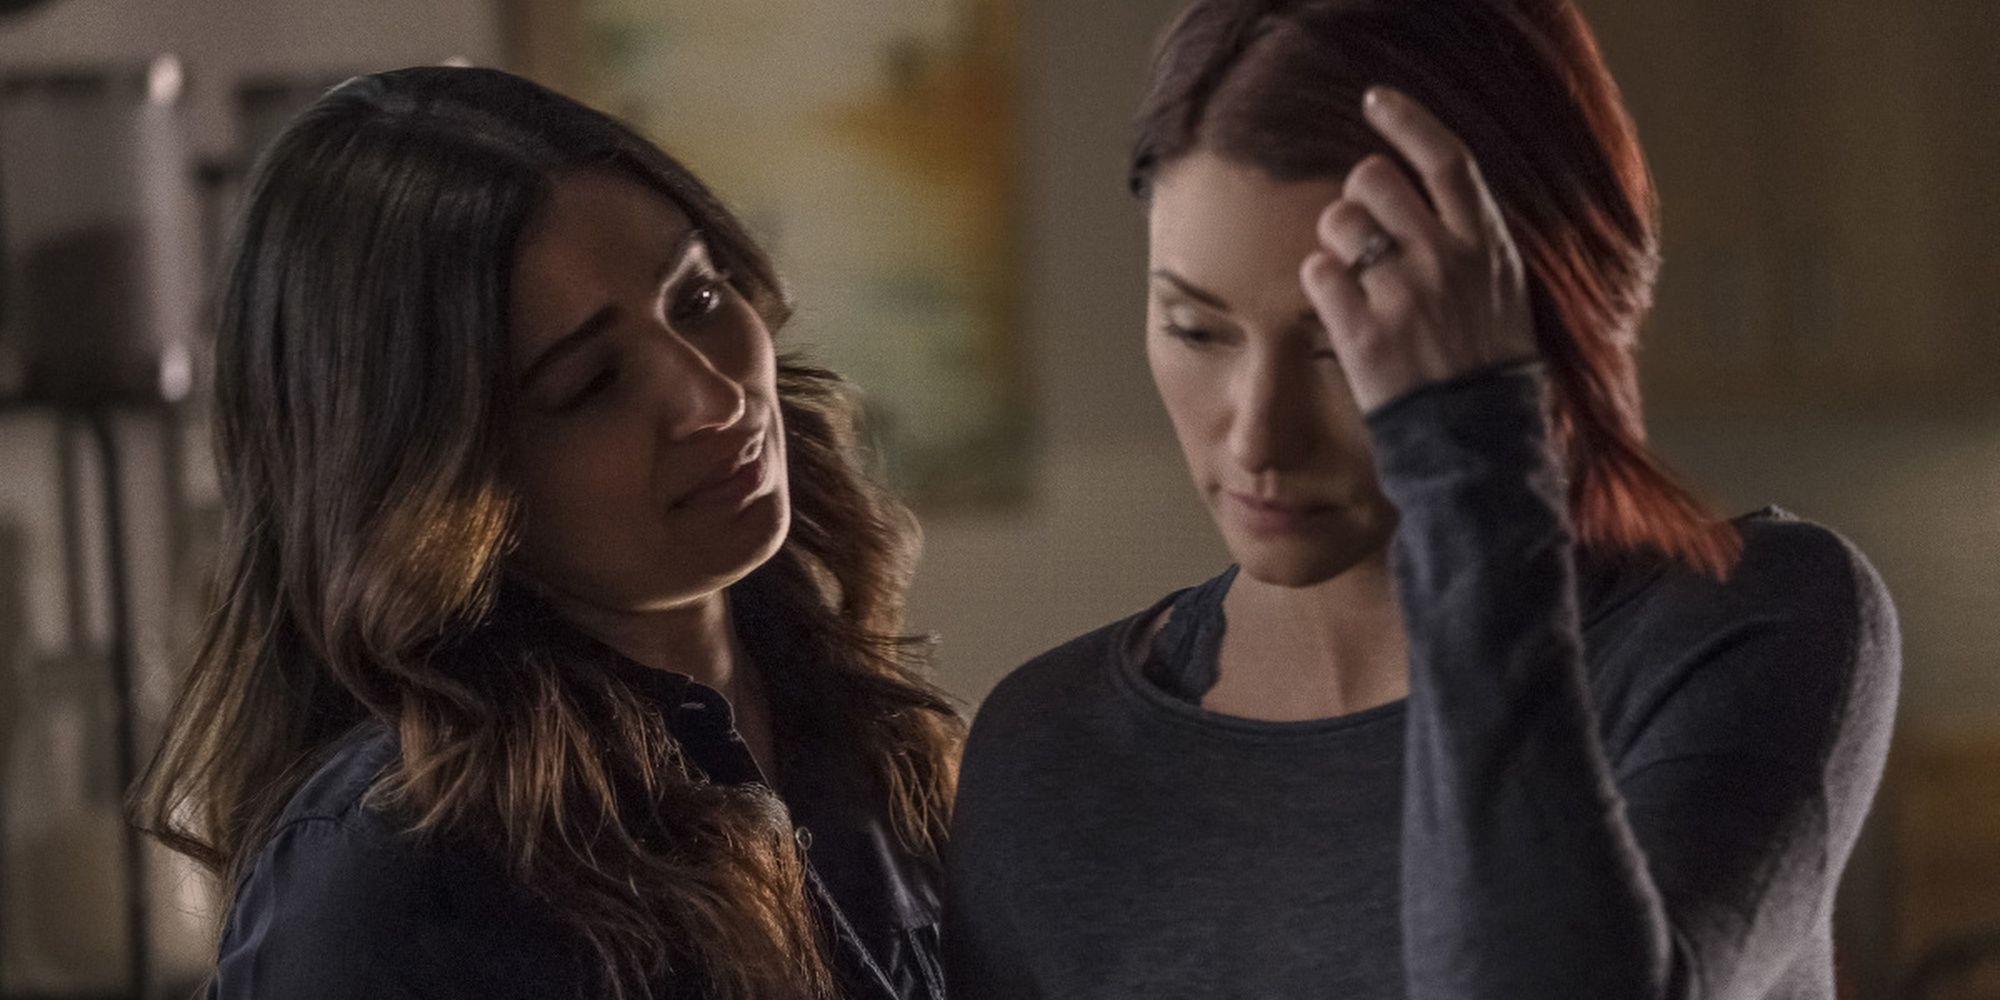 Supergirl Alex and Maggie as they break up